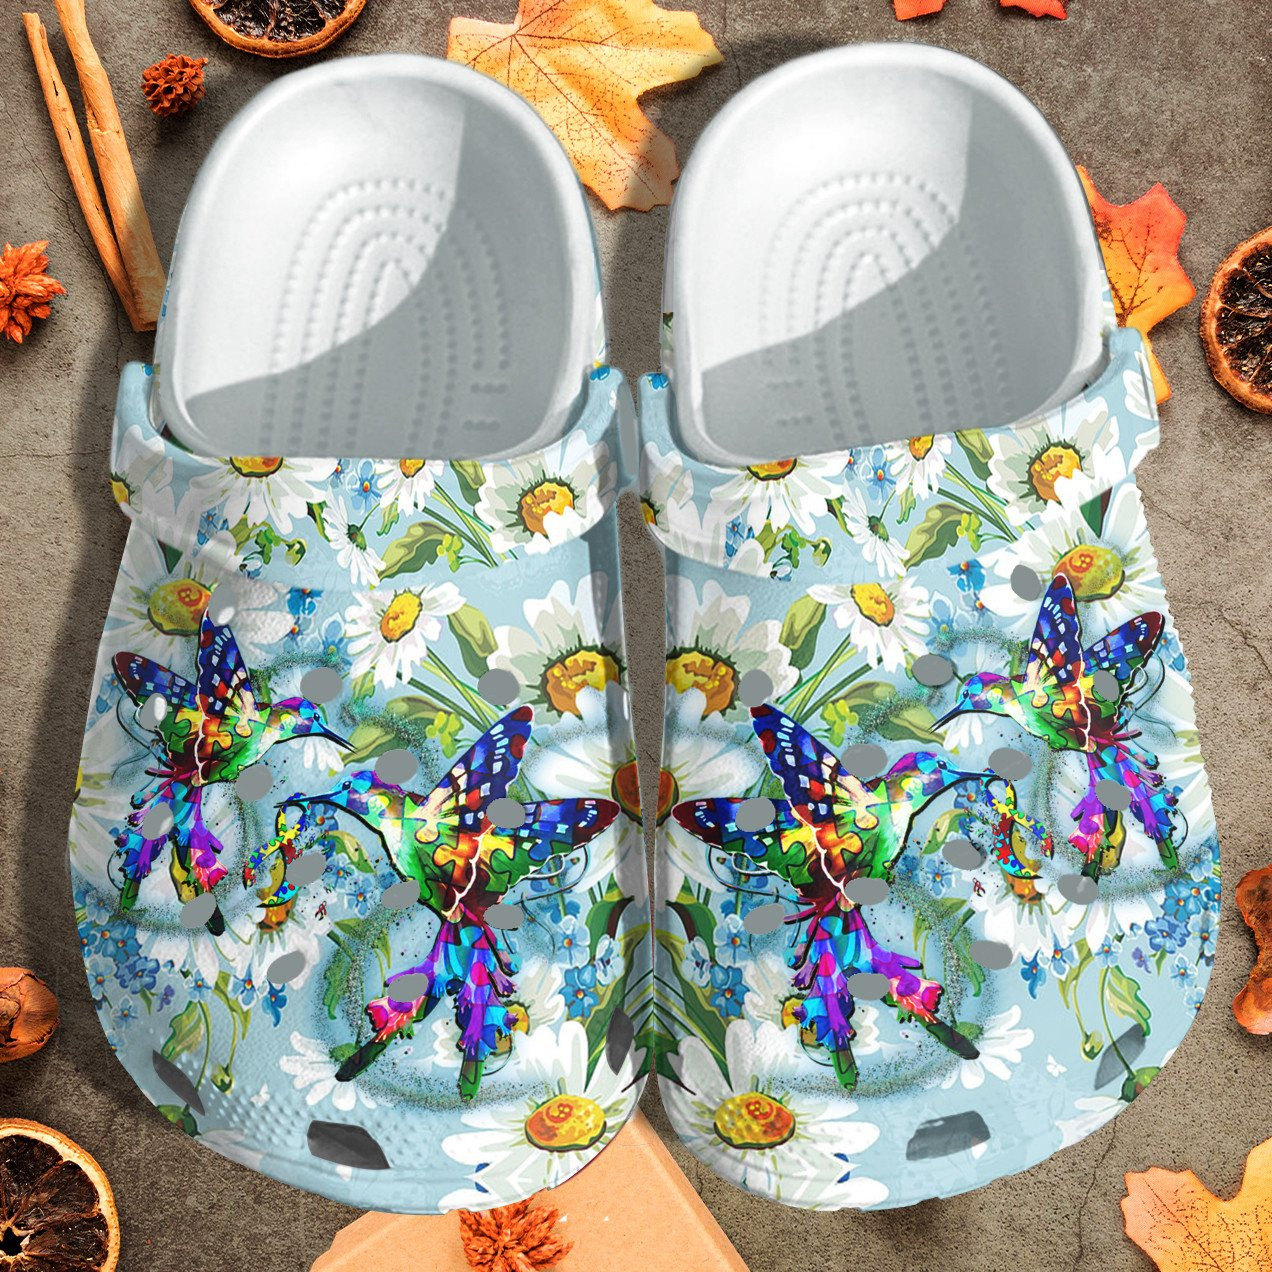 Humming Birds Autism Daisy Flower Style Crocs Shoes - Autism Awareness Shoes Croc Clogs Gifts For Women Girl